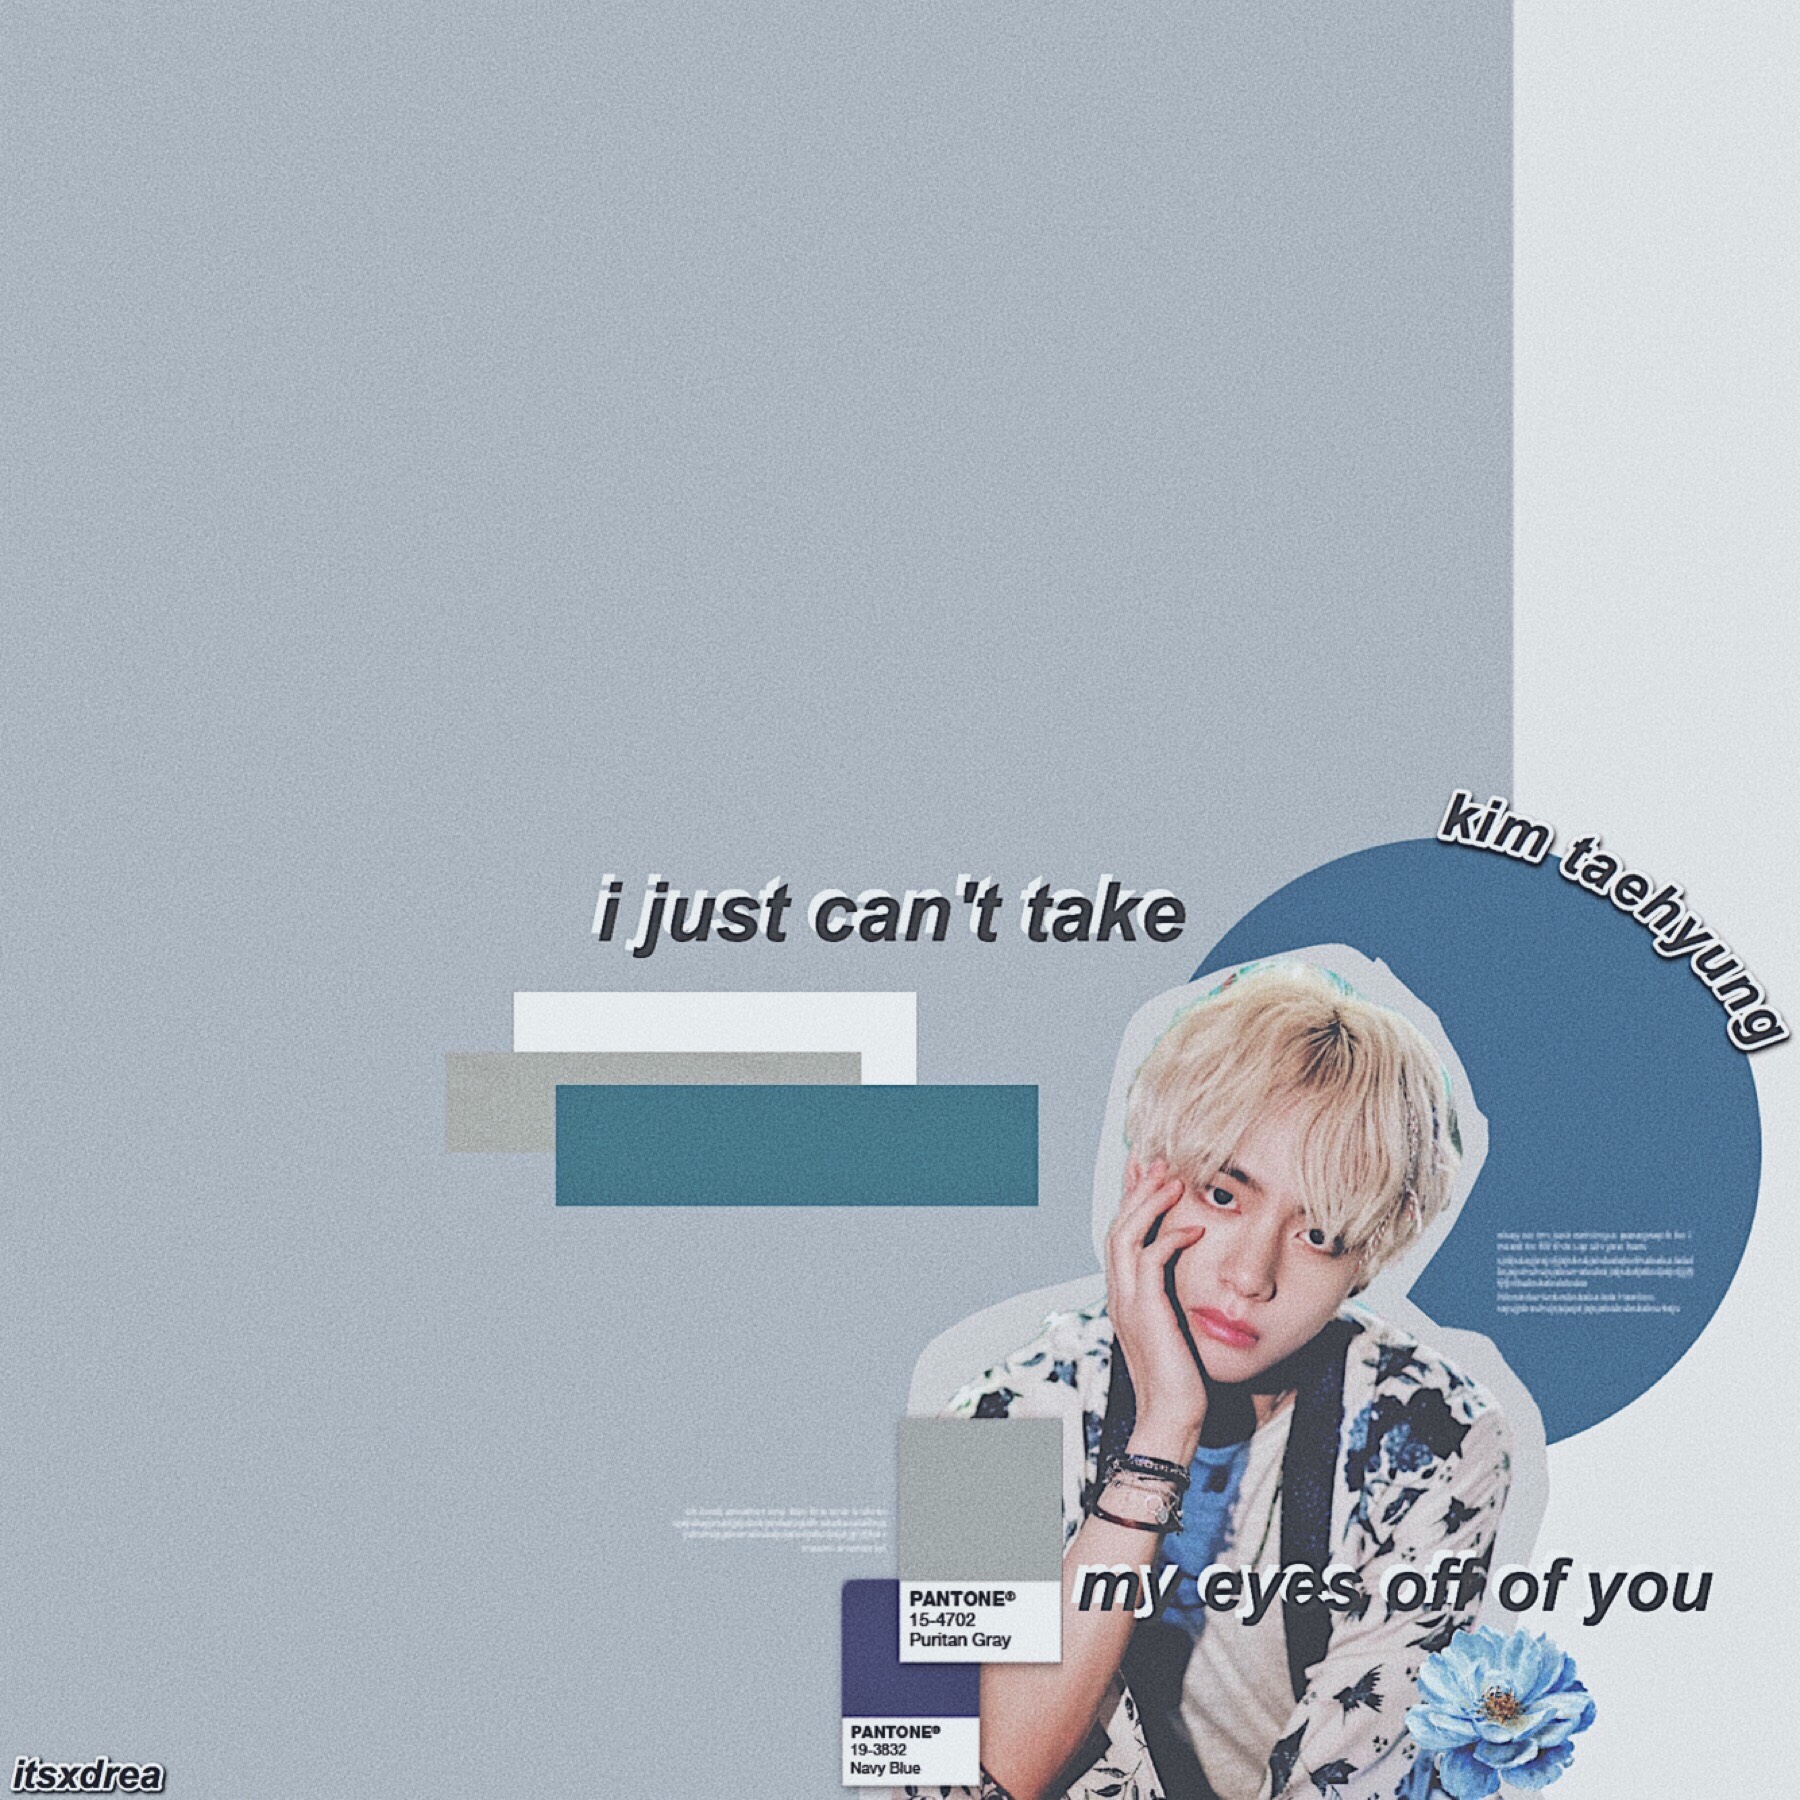 🦋
| for @ex0tic-edits games | 
here's an edit of my bby :,) bts' new song by tae nd hoseok with zara larsson is honestly so good UGH 😭 i loved everything abt it, specially tae skajdhajak